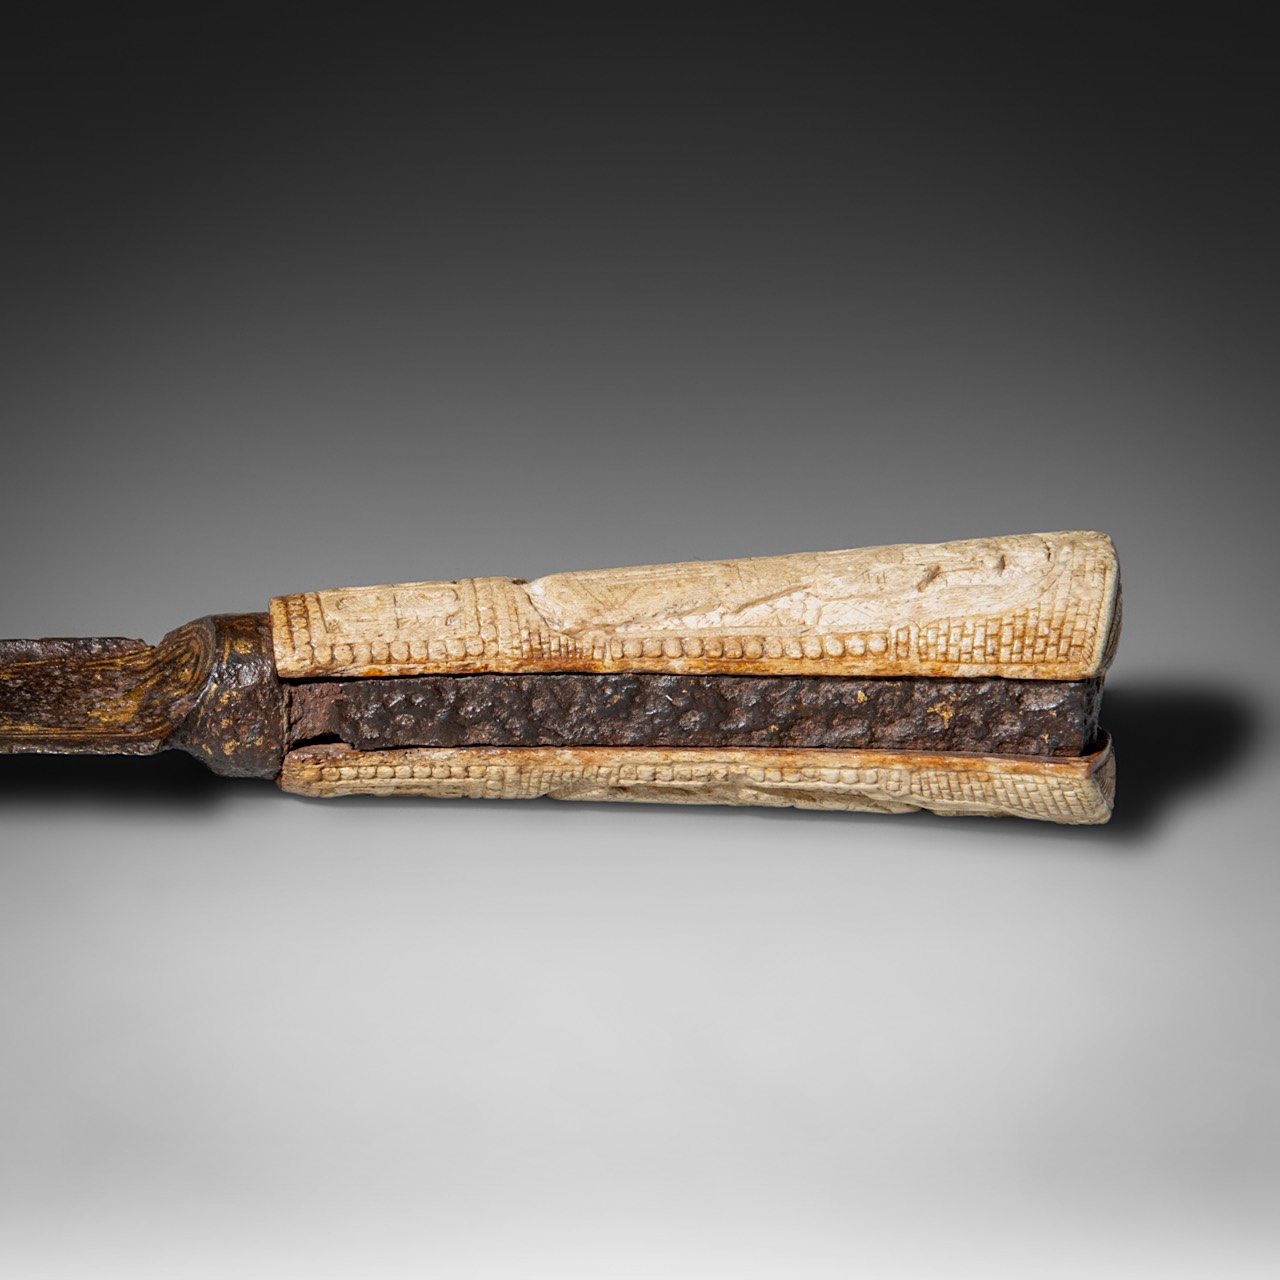 A rare, probably Byzantine dagger with a relief-cut bone handle, 12th/13thC, total L 36 cm - Image 9 of 10